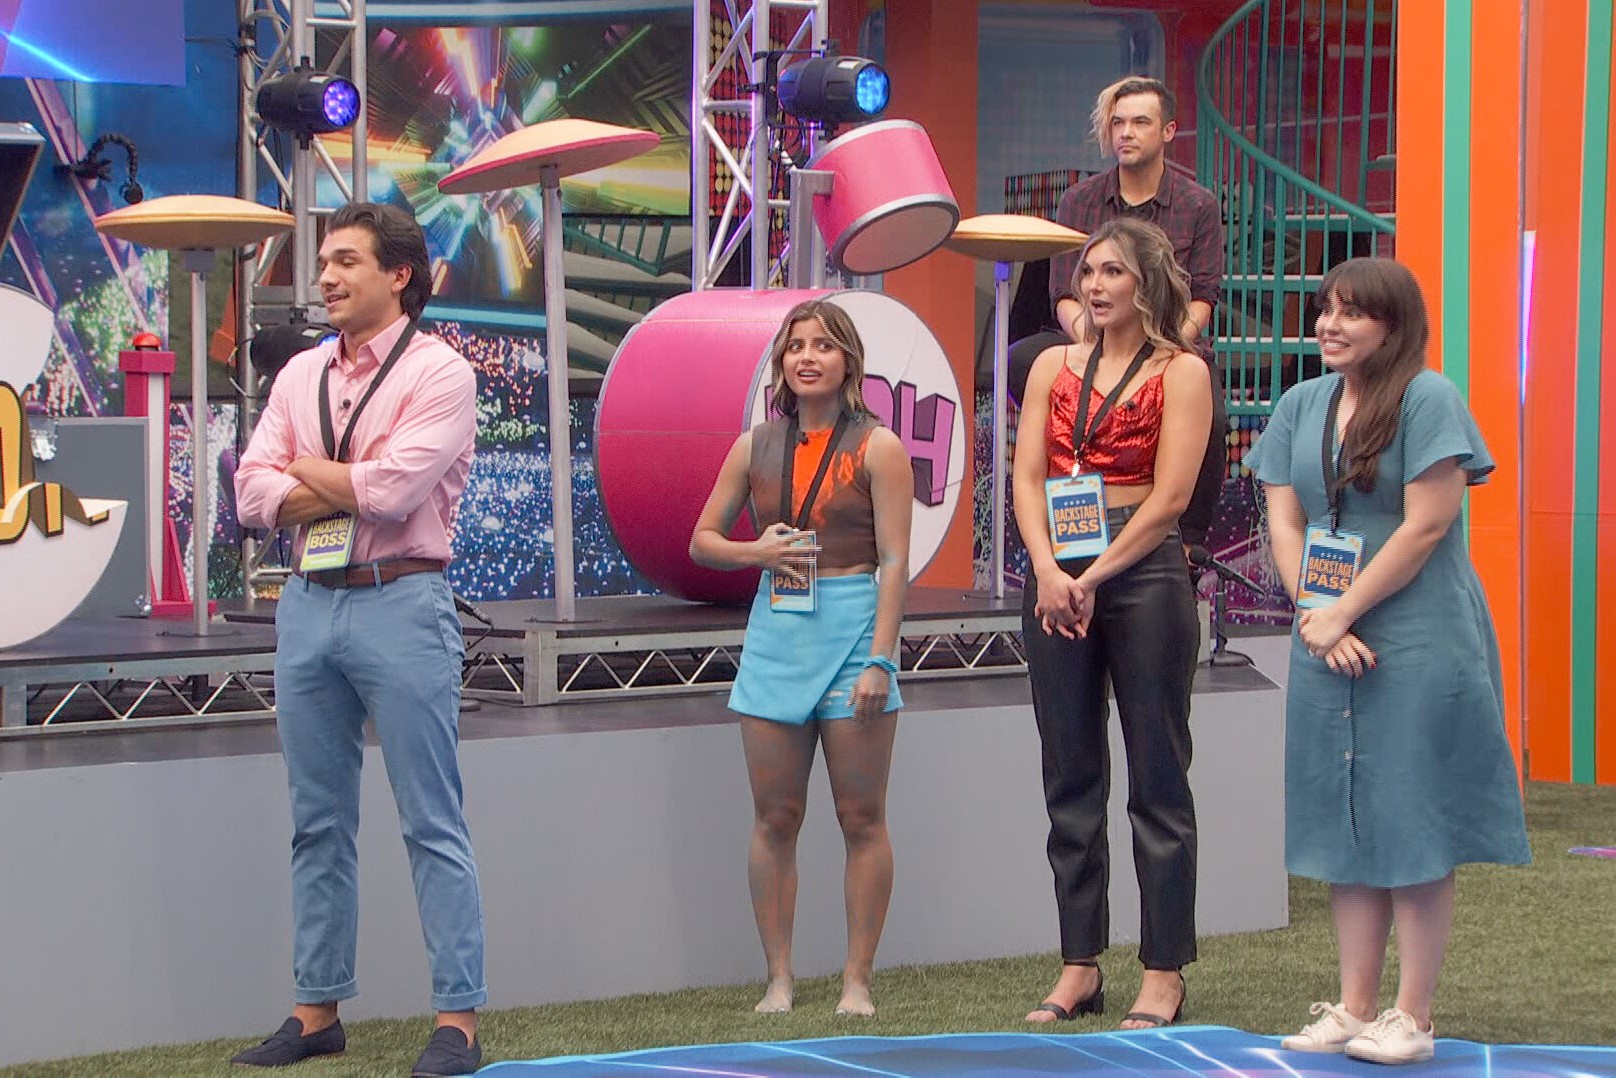 Joe 'Pooch' Pucciarelli, Paloma Aguilar, Alyssa Snider, and Brittany Hoopes, who are on 'Big Brother' Season 24, begin the game with, spoiler alert, backstage passes. They stand in a line in the backyard, which is set up for a competition.